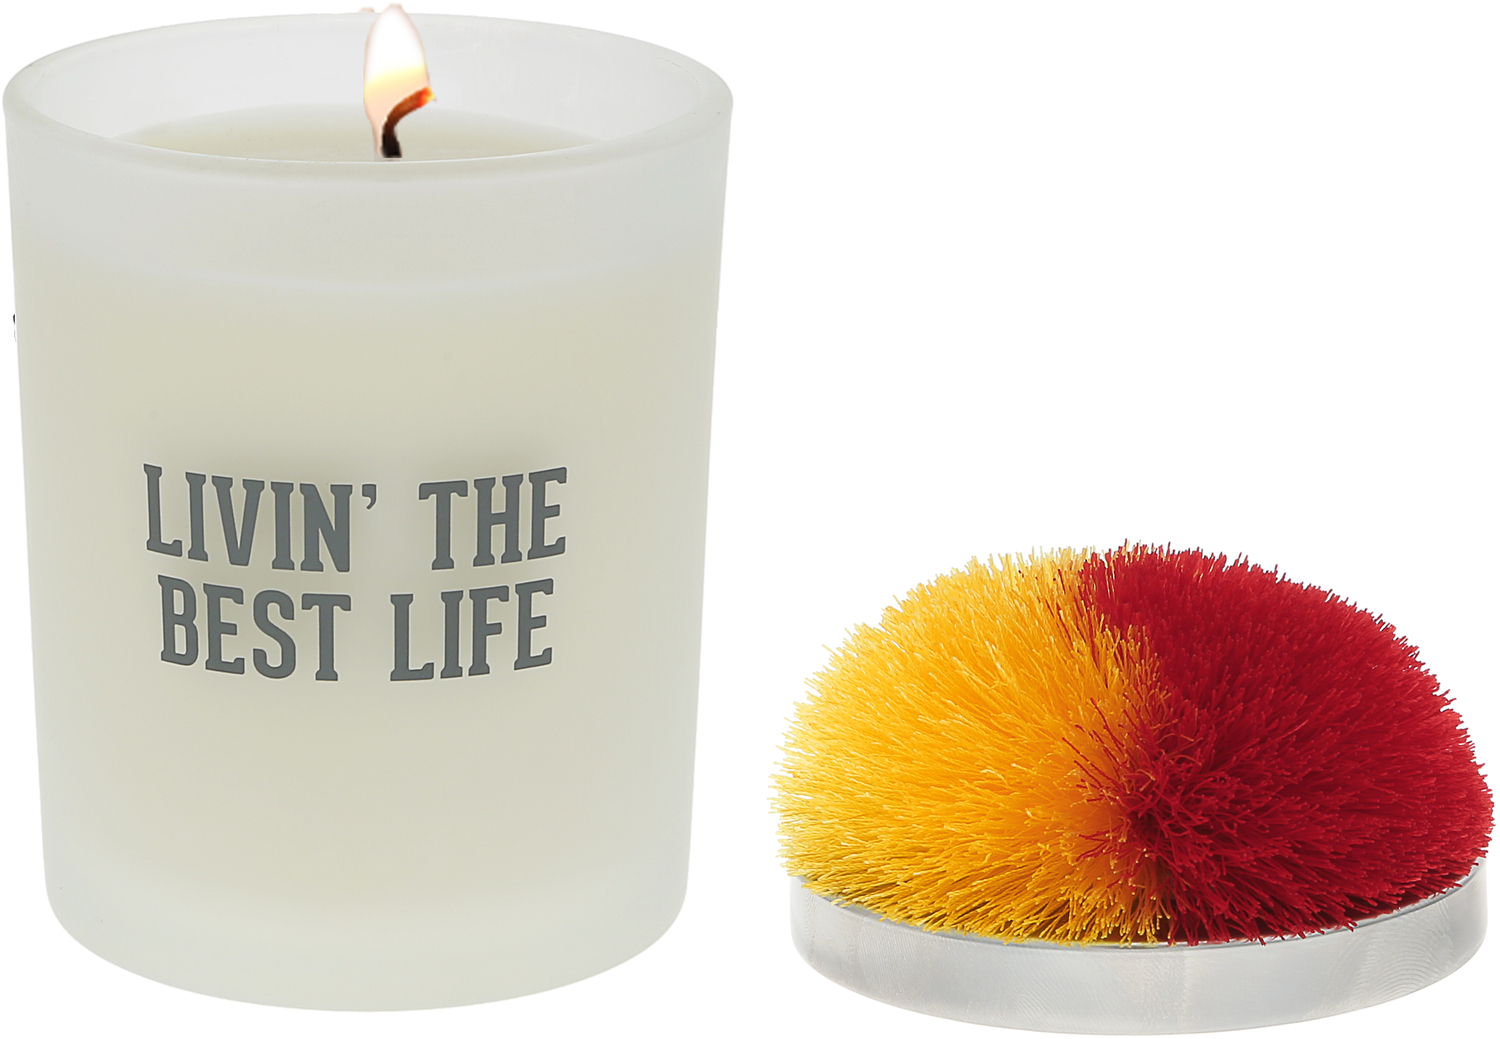 Best Life - Red & Yellow by Repre-Scent - Best Life - Red & Yellow - 5.5 oz - 100% Soy Wax Candle with Pom Pom Lid
Scent: Tranquility